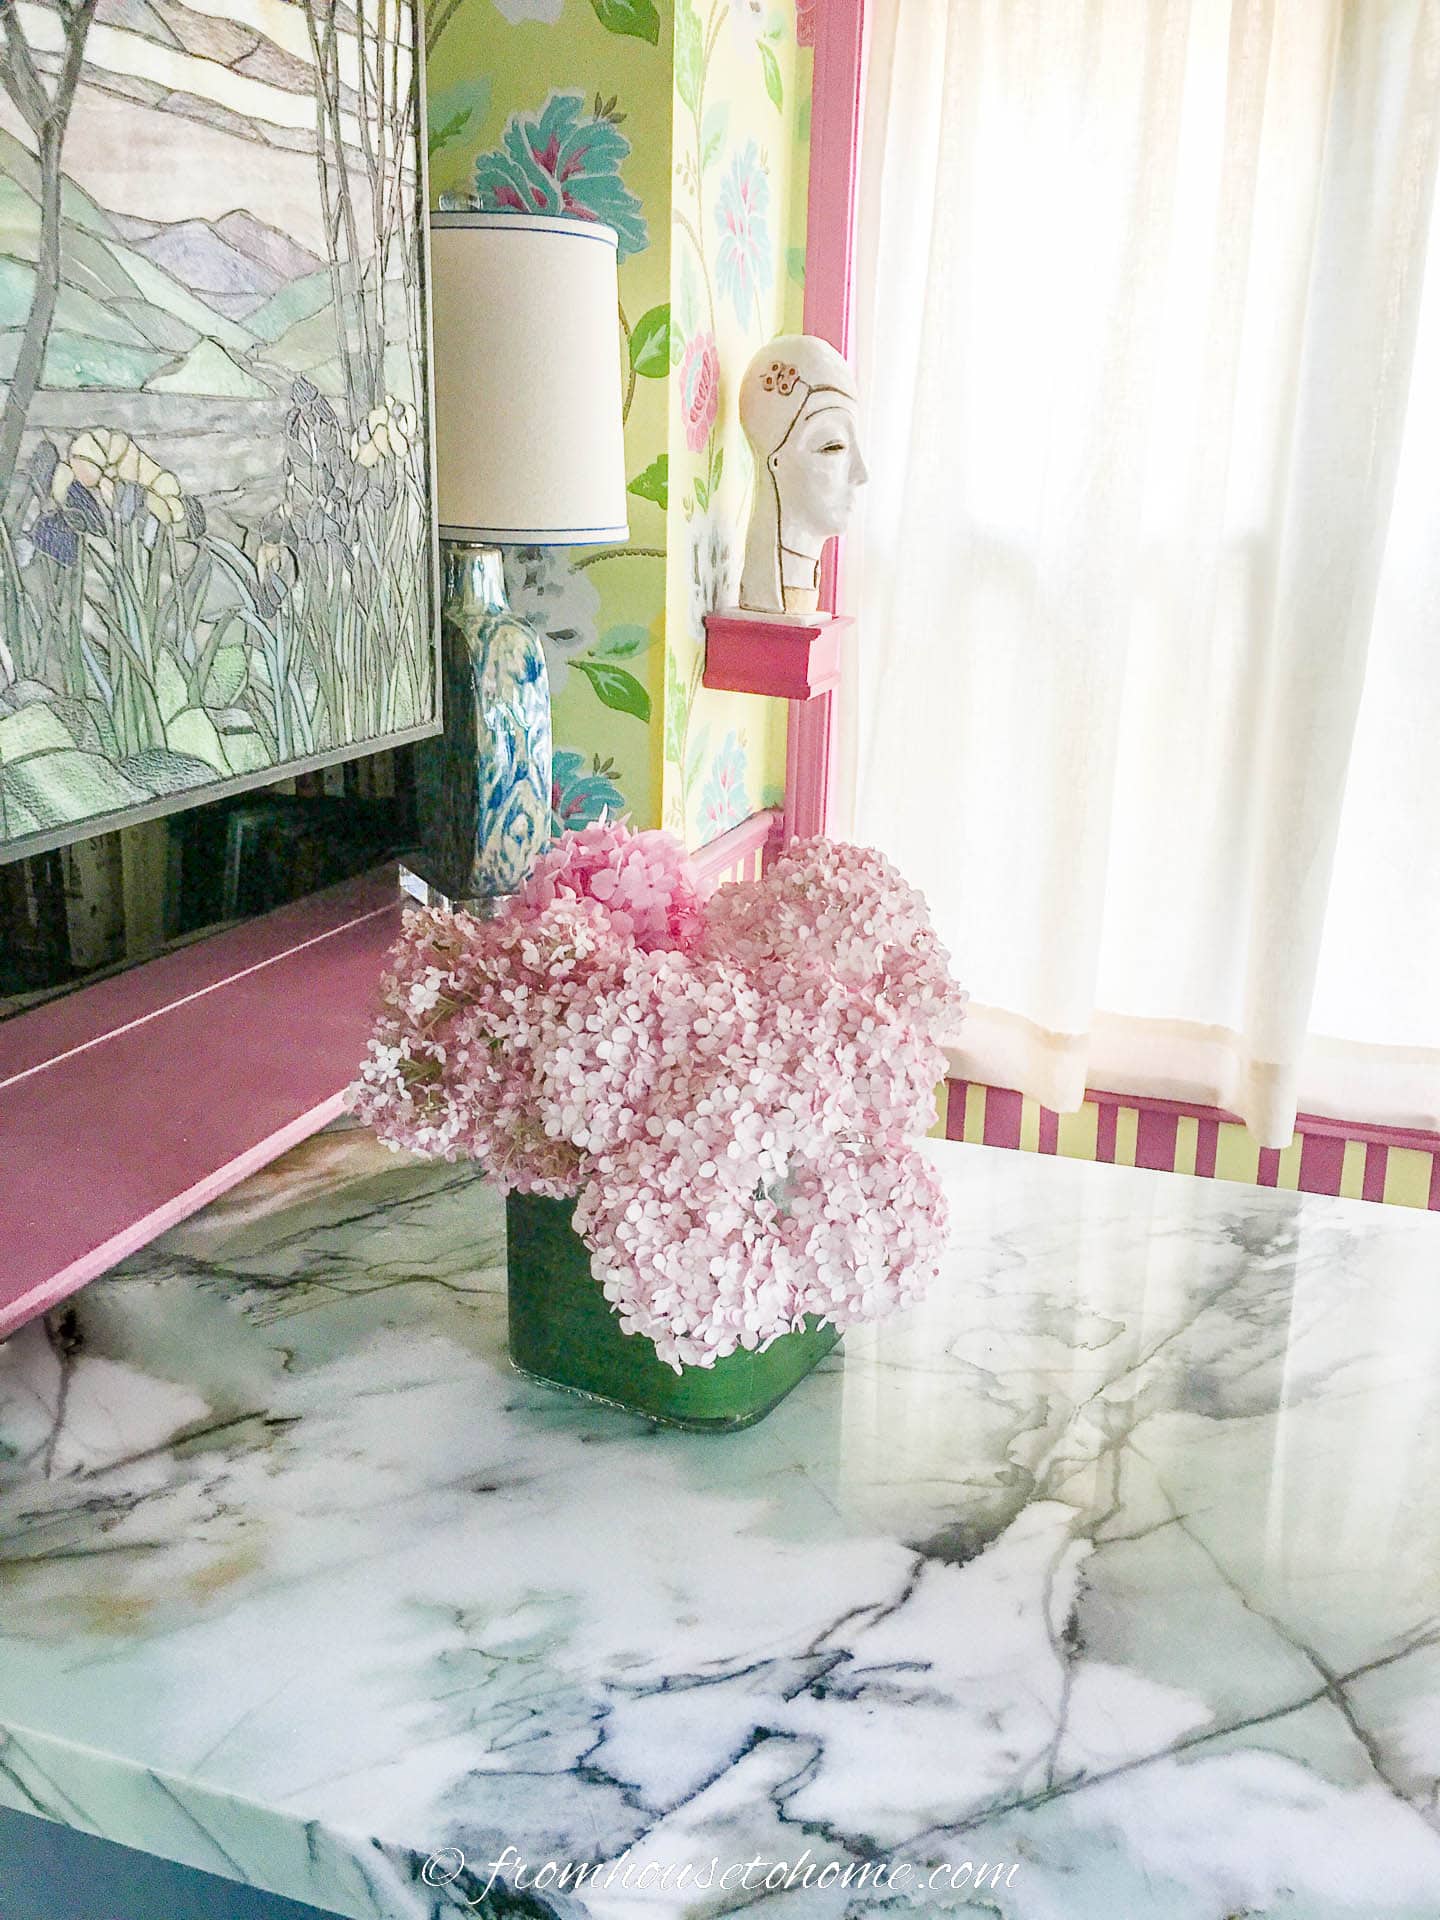 Pink hydrangeas on a teal, white and black quartzite countertop